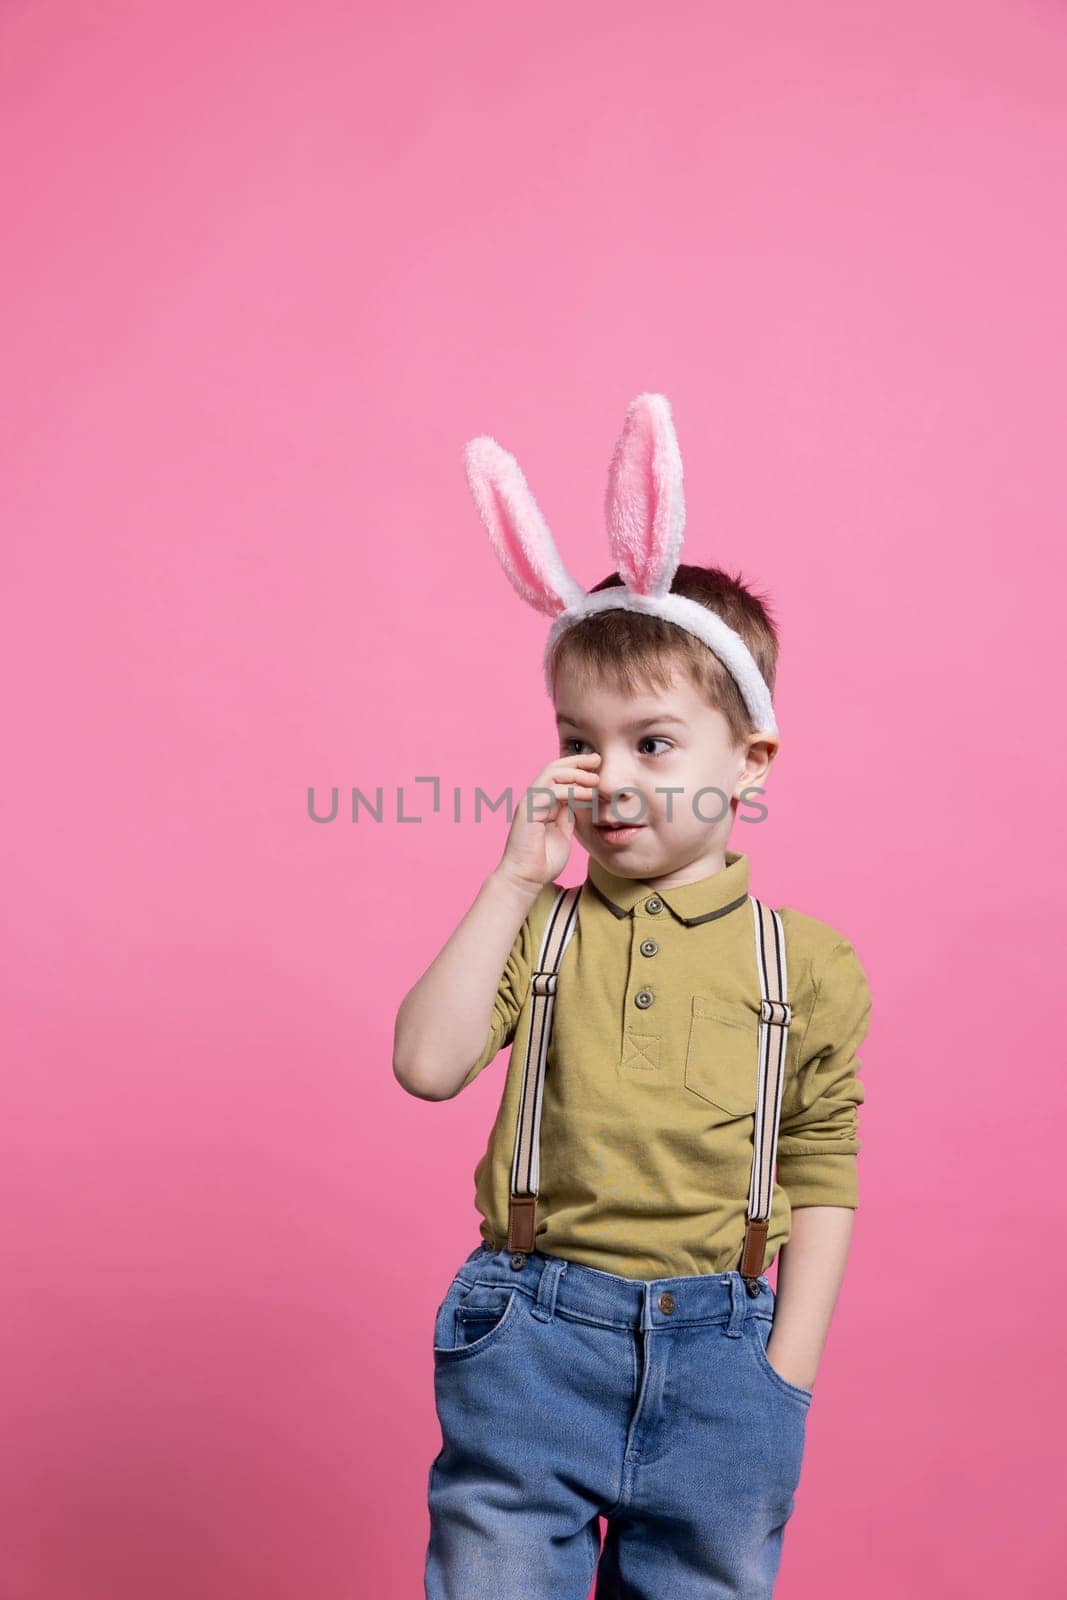 Joyful young kid feeling confident posing against pink background by DCStudio